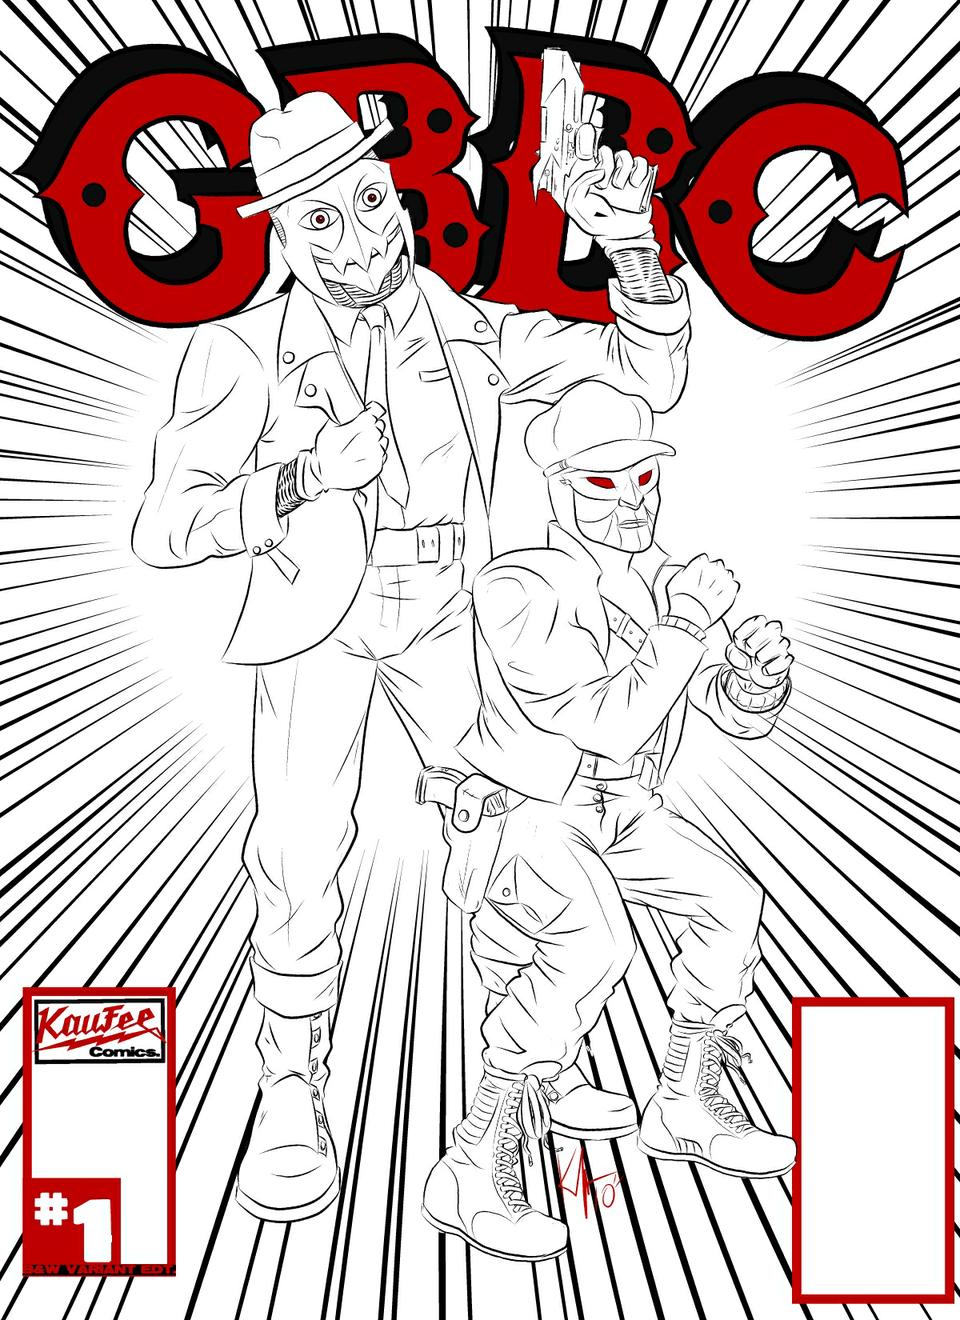 GBBC #1 Variant Cover from Kaufee Comics